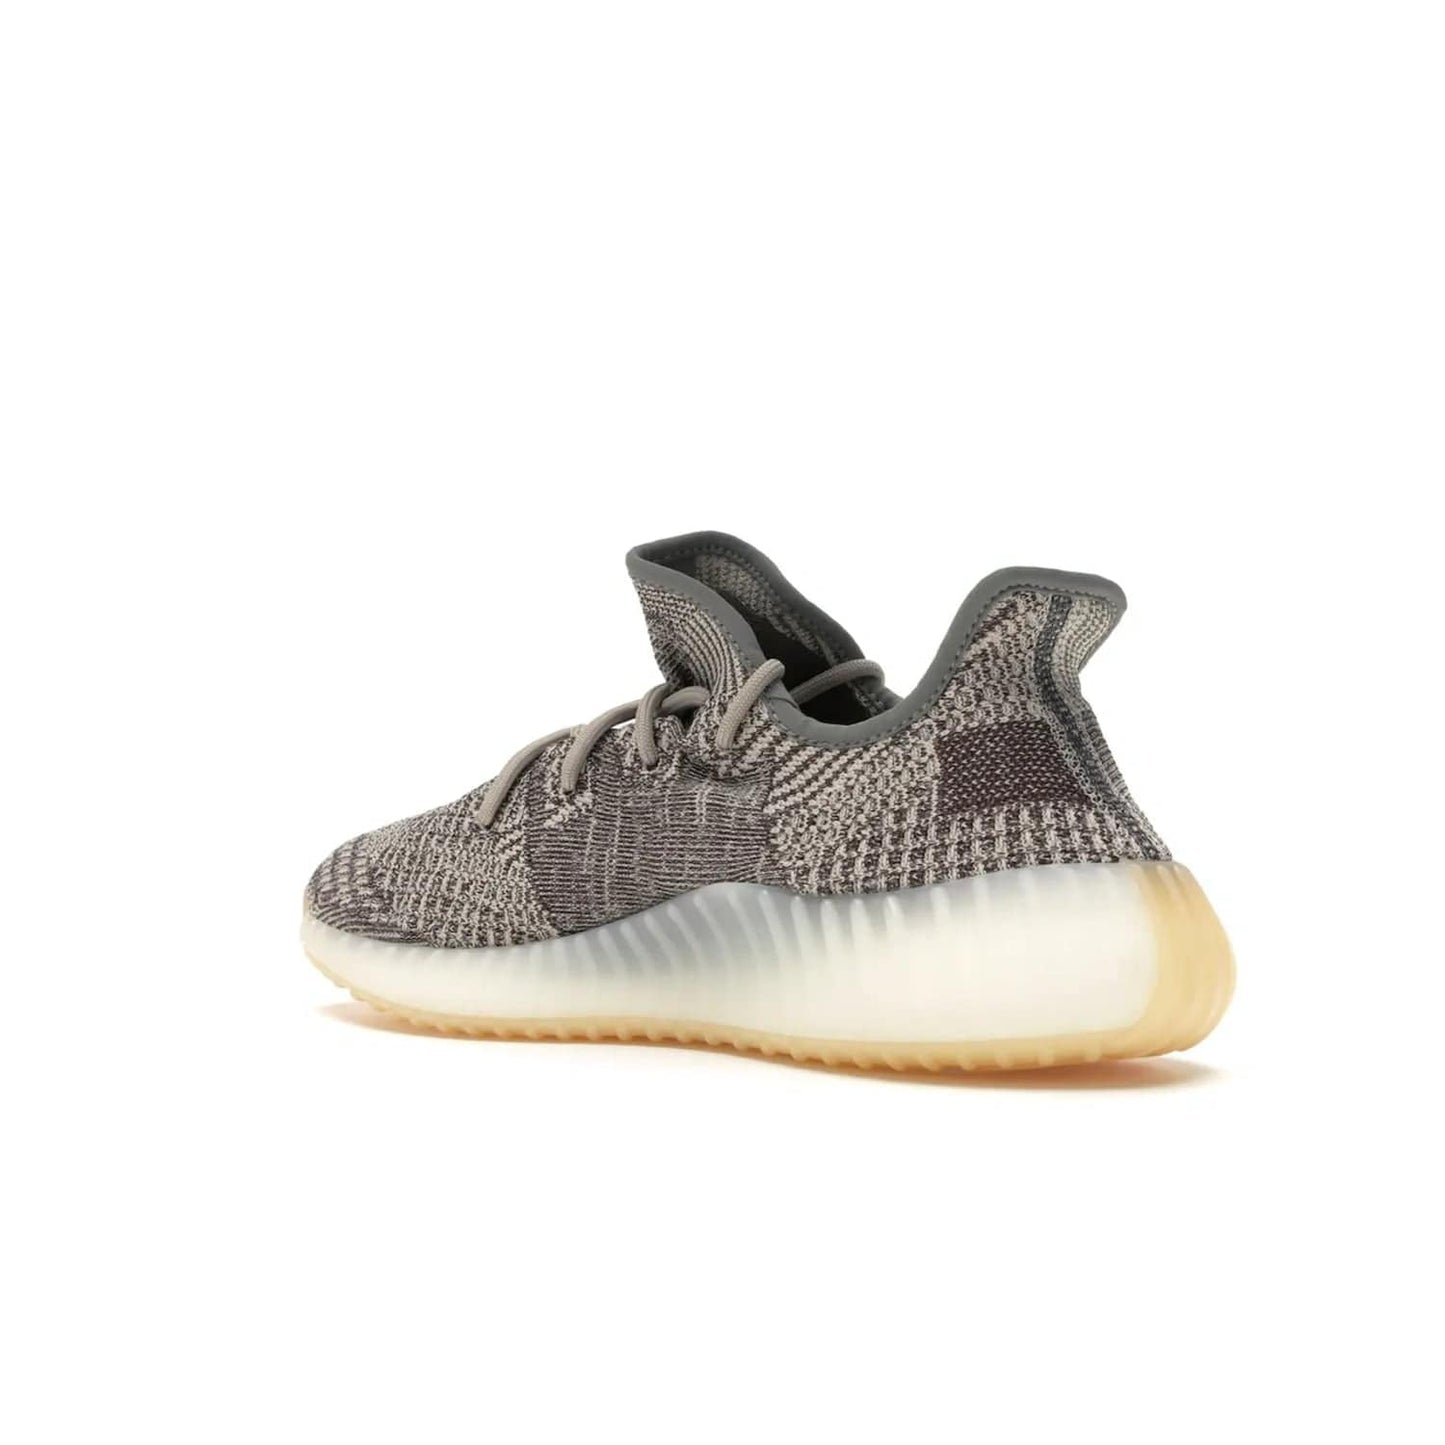 adidas Yeezy Boost 350 V2 Zyon - Image 23 - Only at www.BallersClubKickz.com - Step up your style game with the adidas Yeezy Boost 350 V2 Zyon. This sleek sneaker features a Primeknit upper, dark side stripe, translucent Boost sole, and creamy white interior providing style and comfort. Get them now!